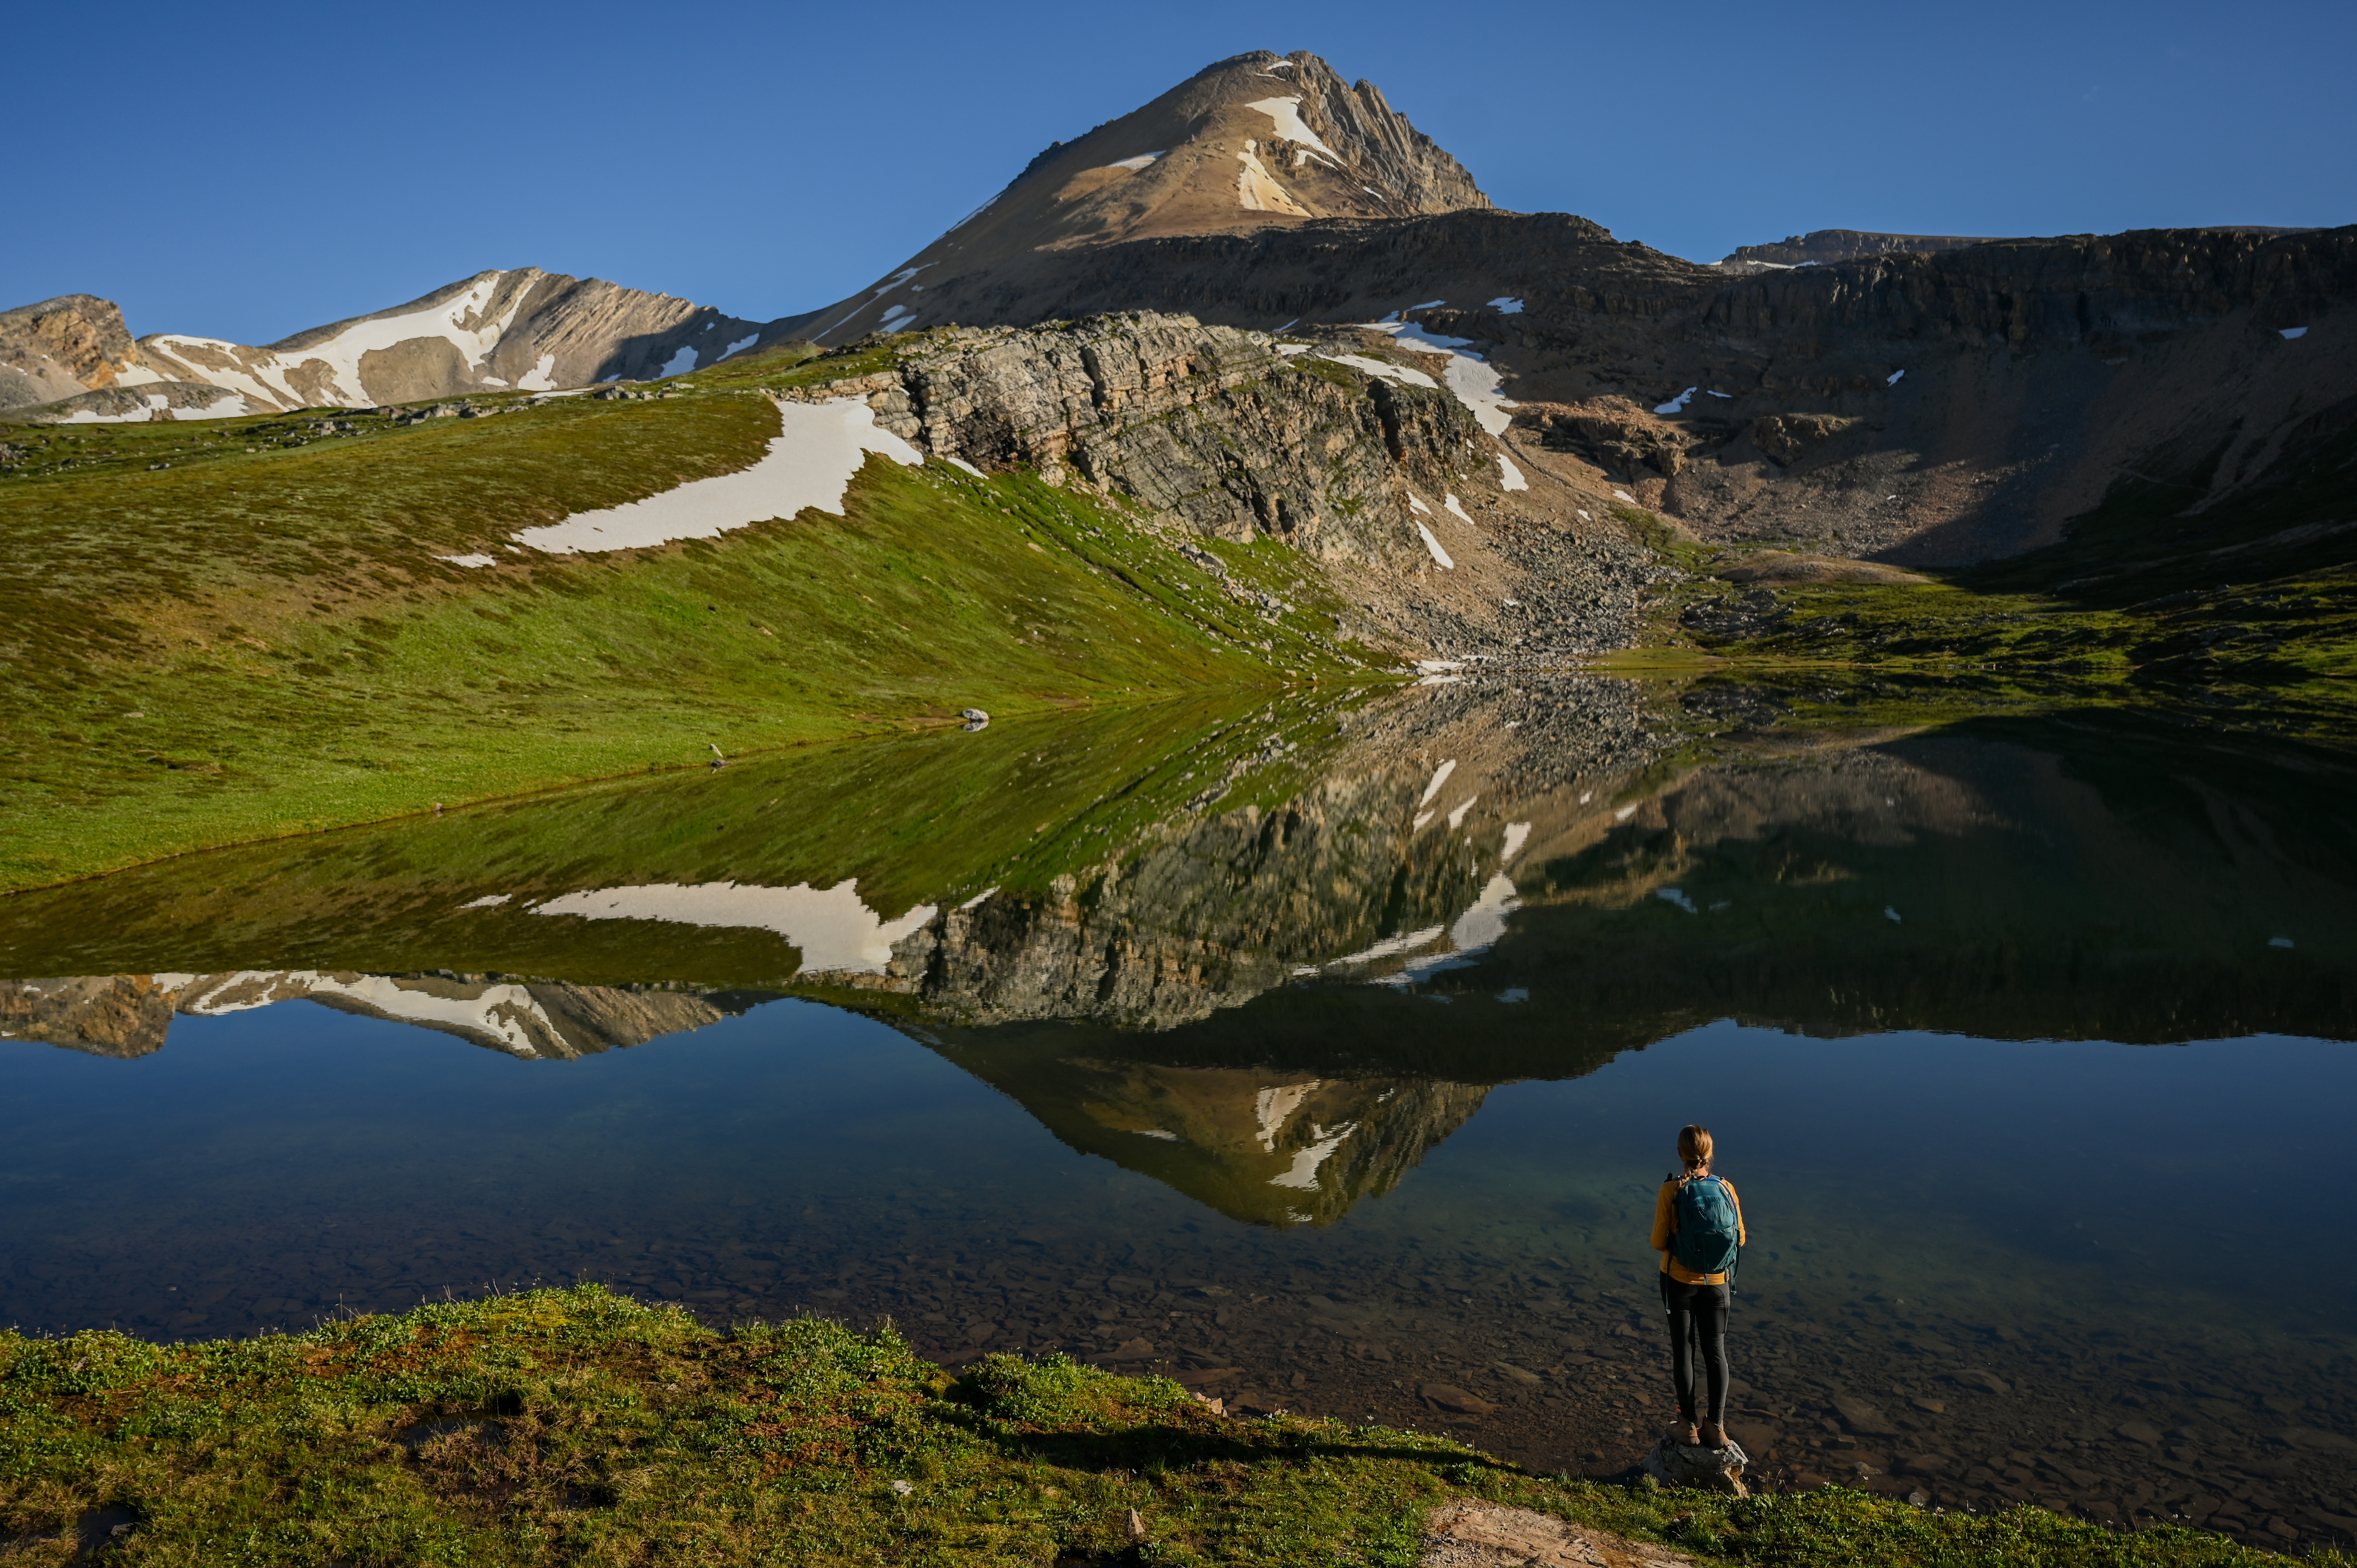 A hiker stands on the shores of Helen Lake below Cirque Peak